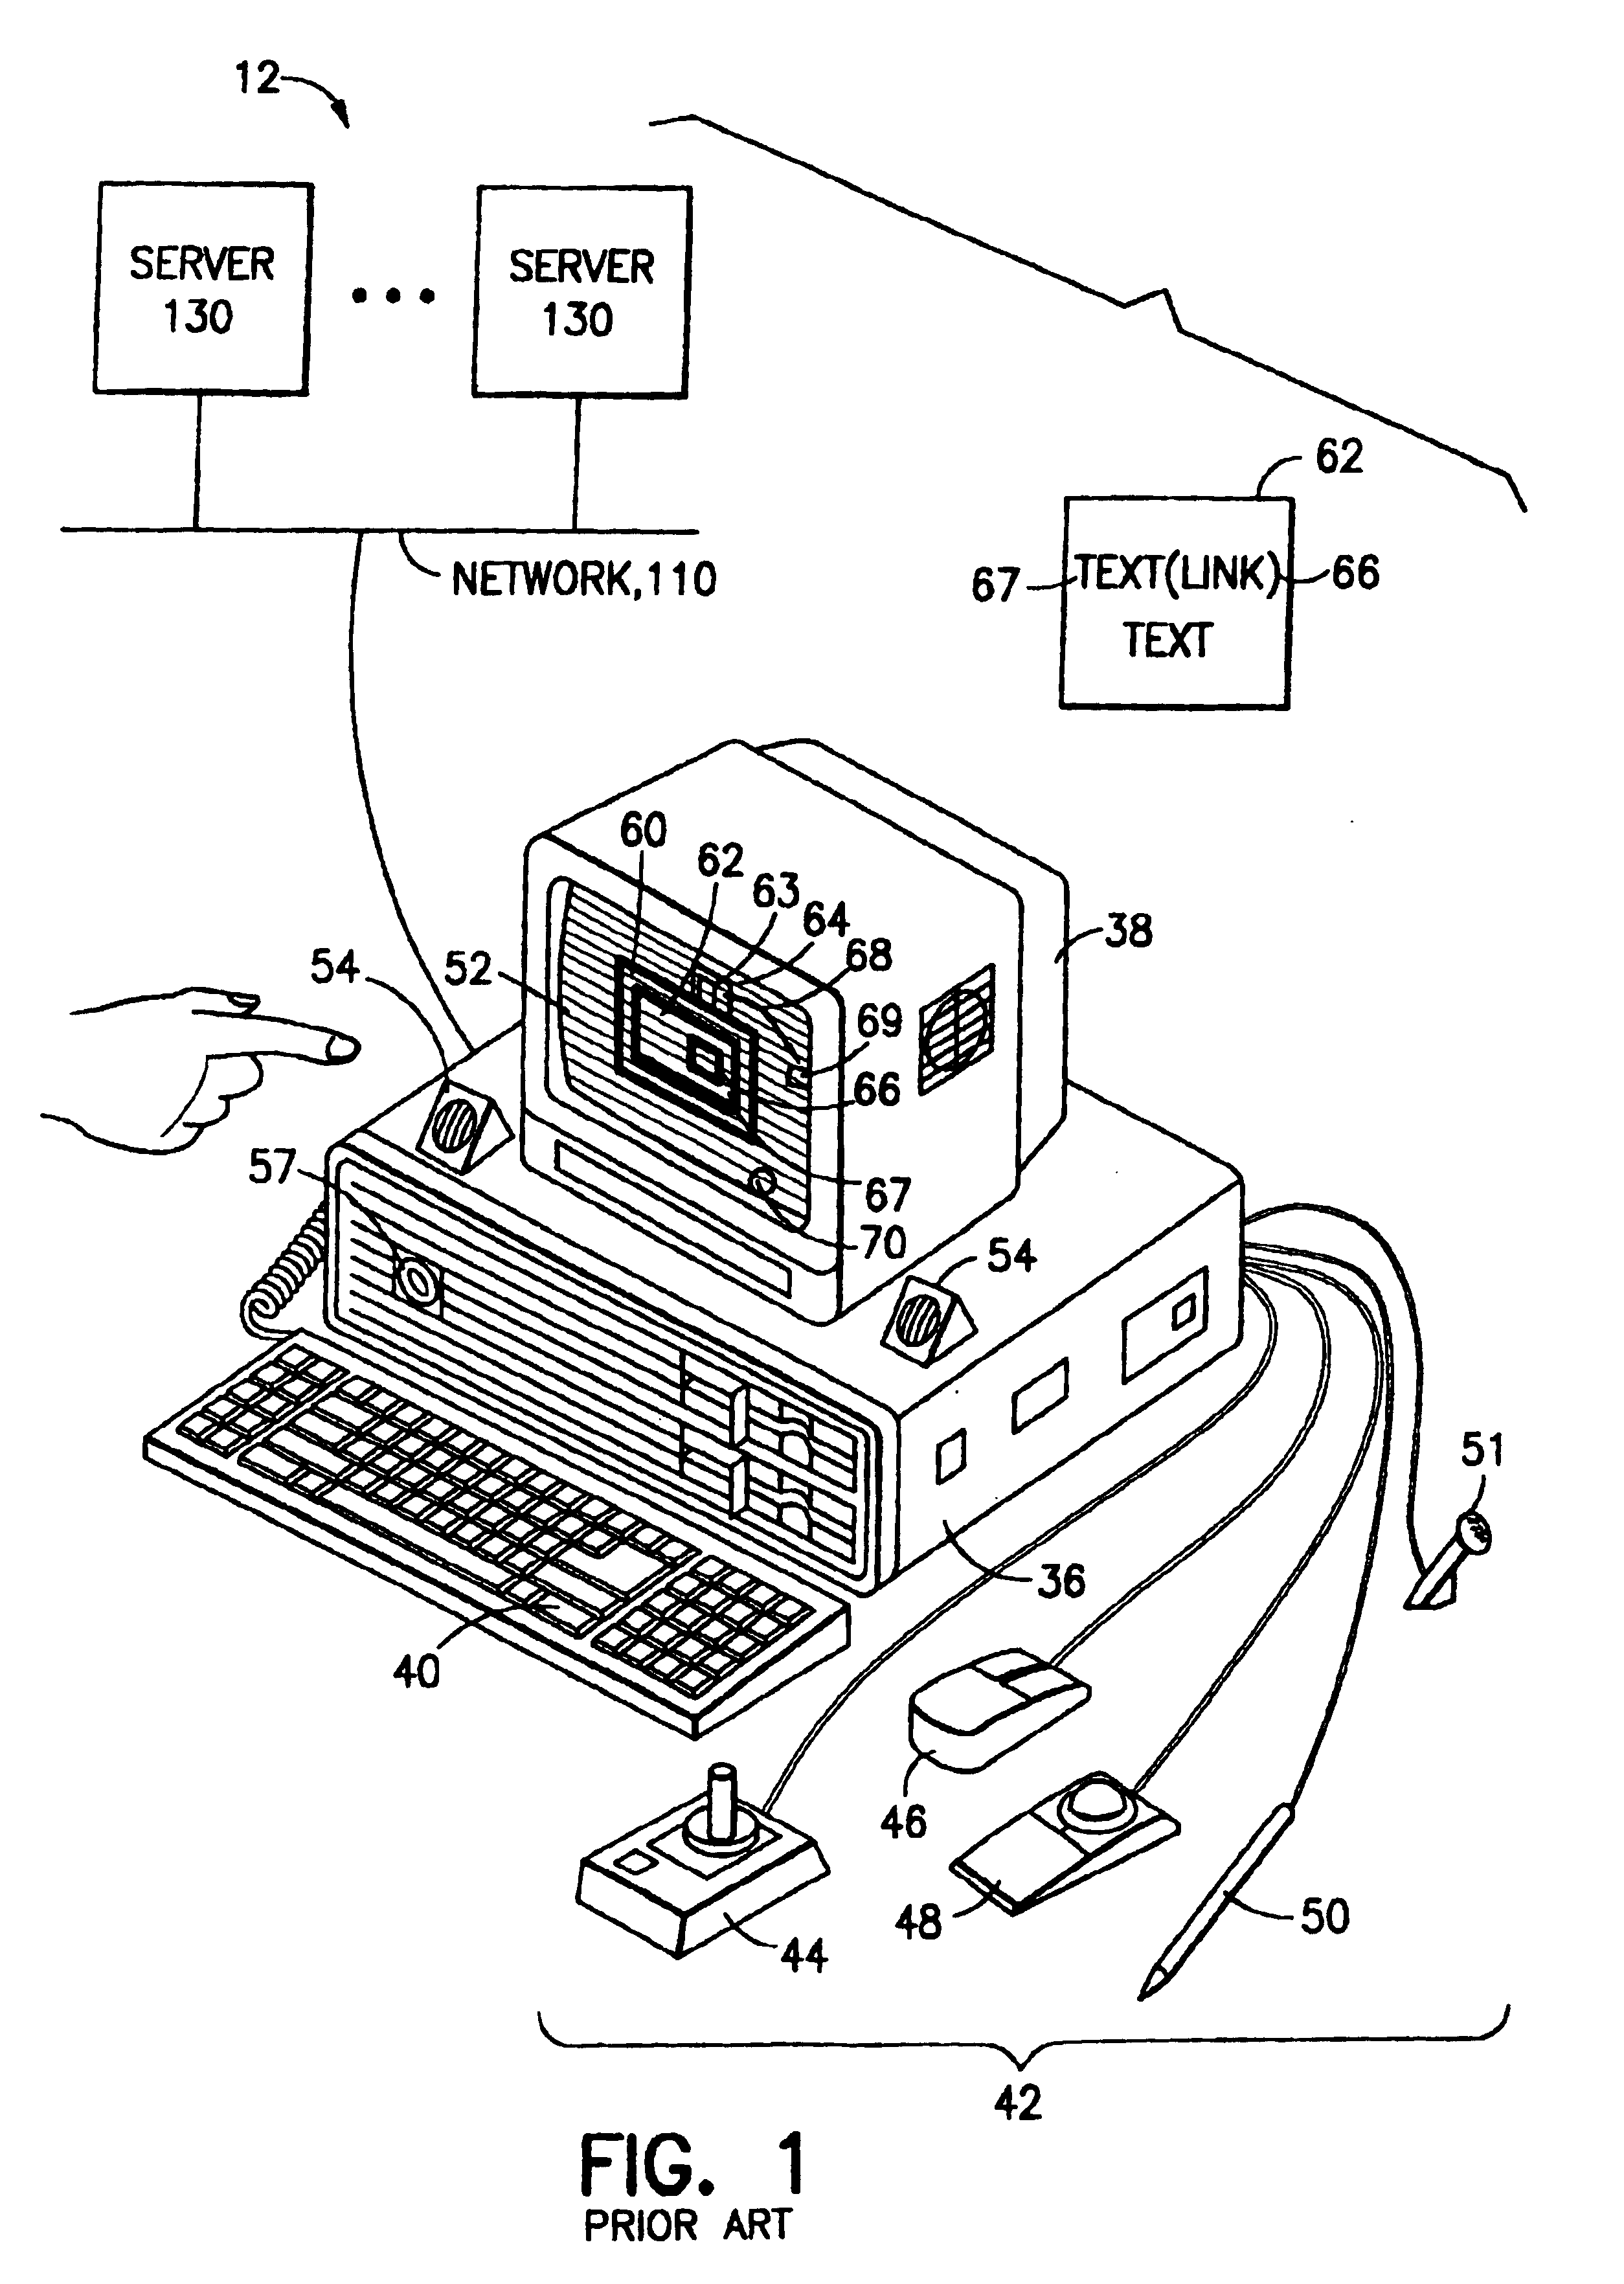 System and method for optimizing computer software and hardware